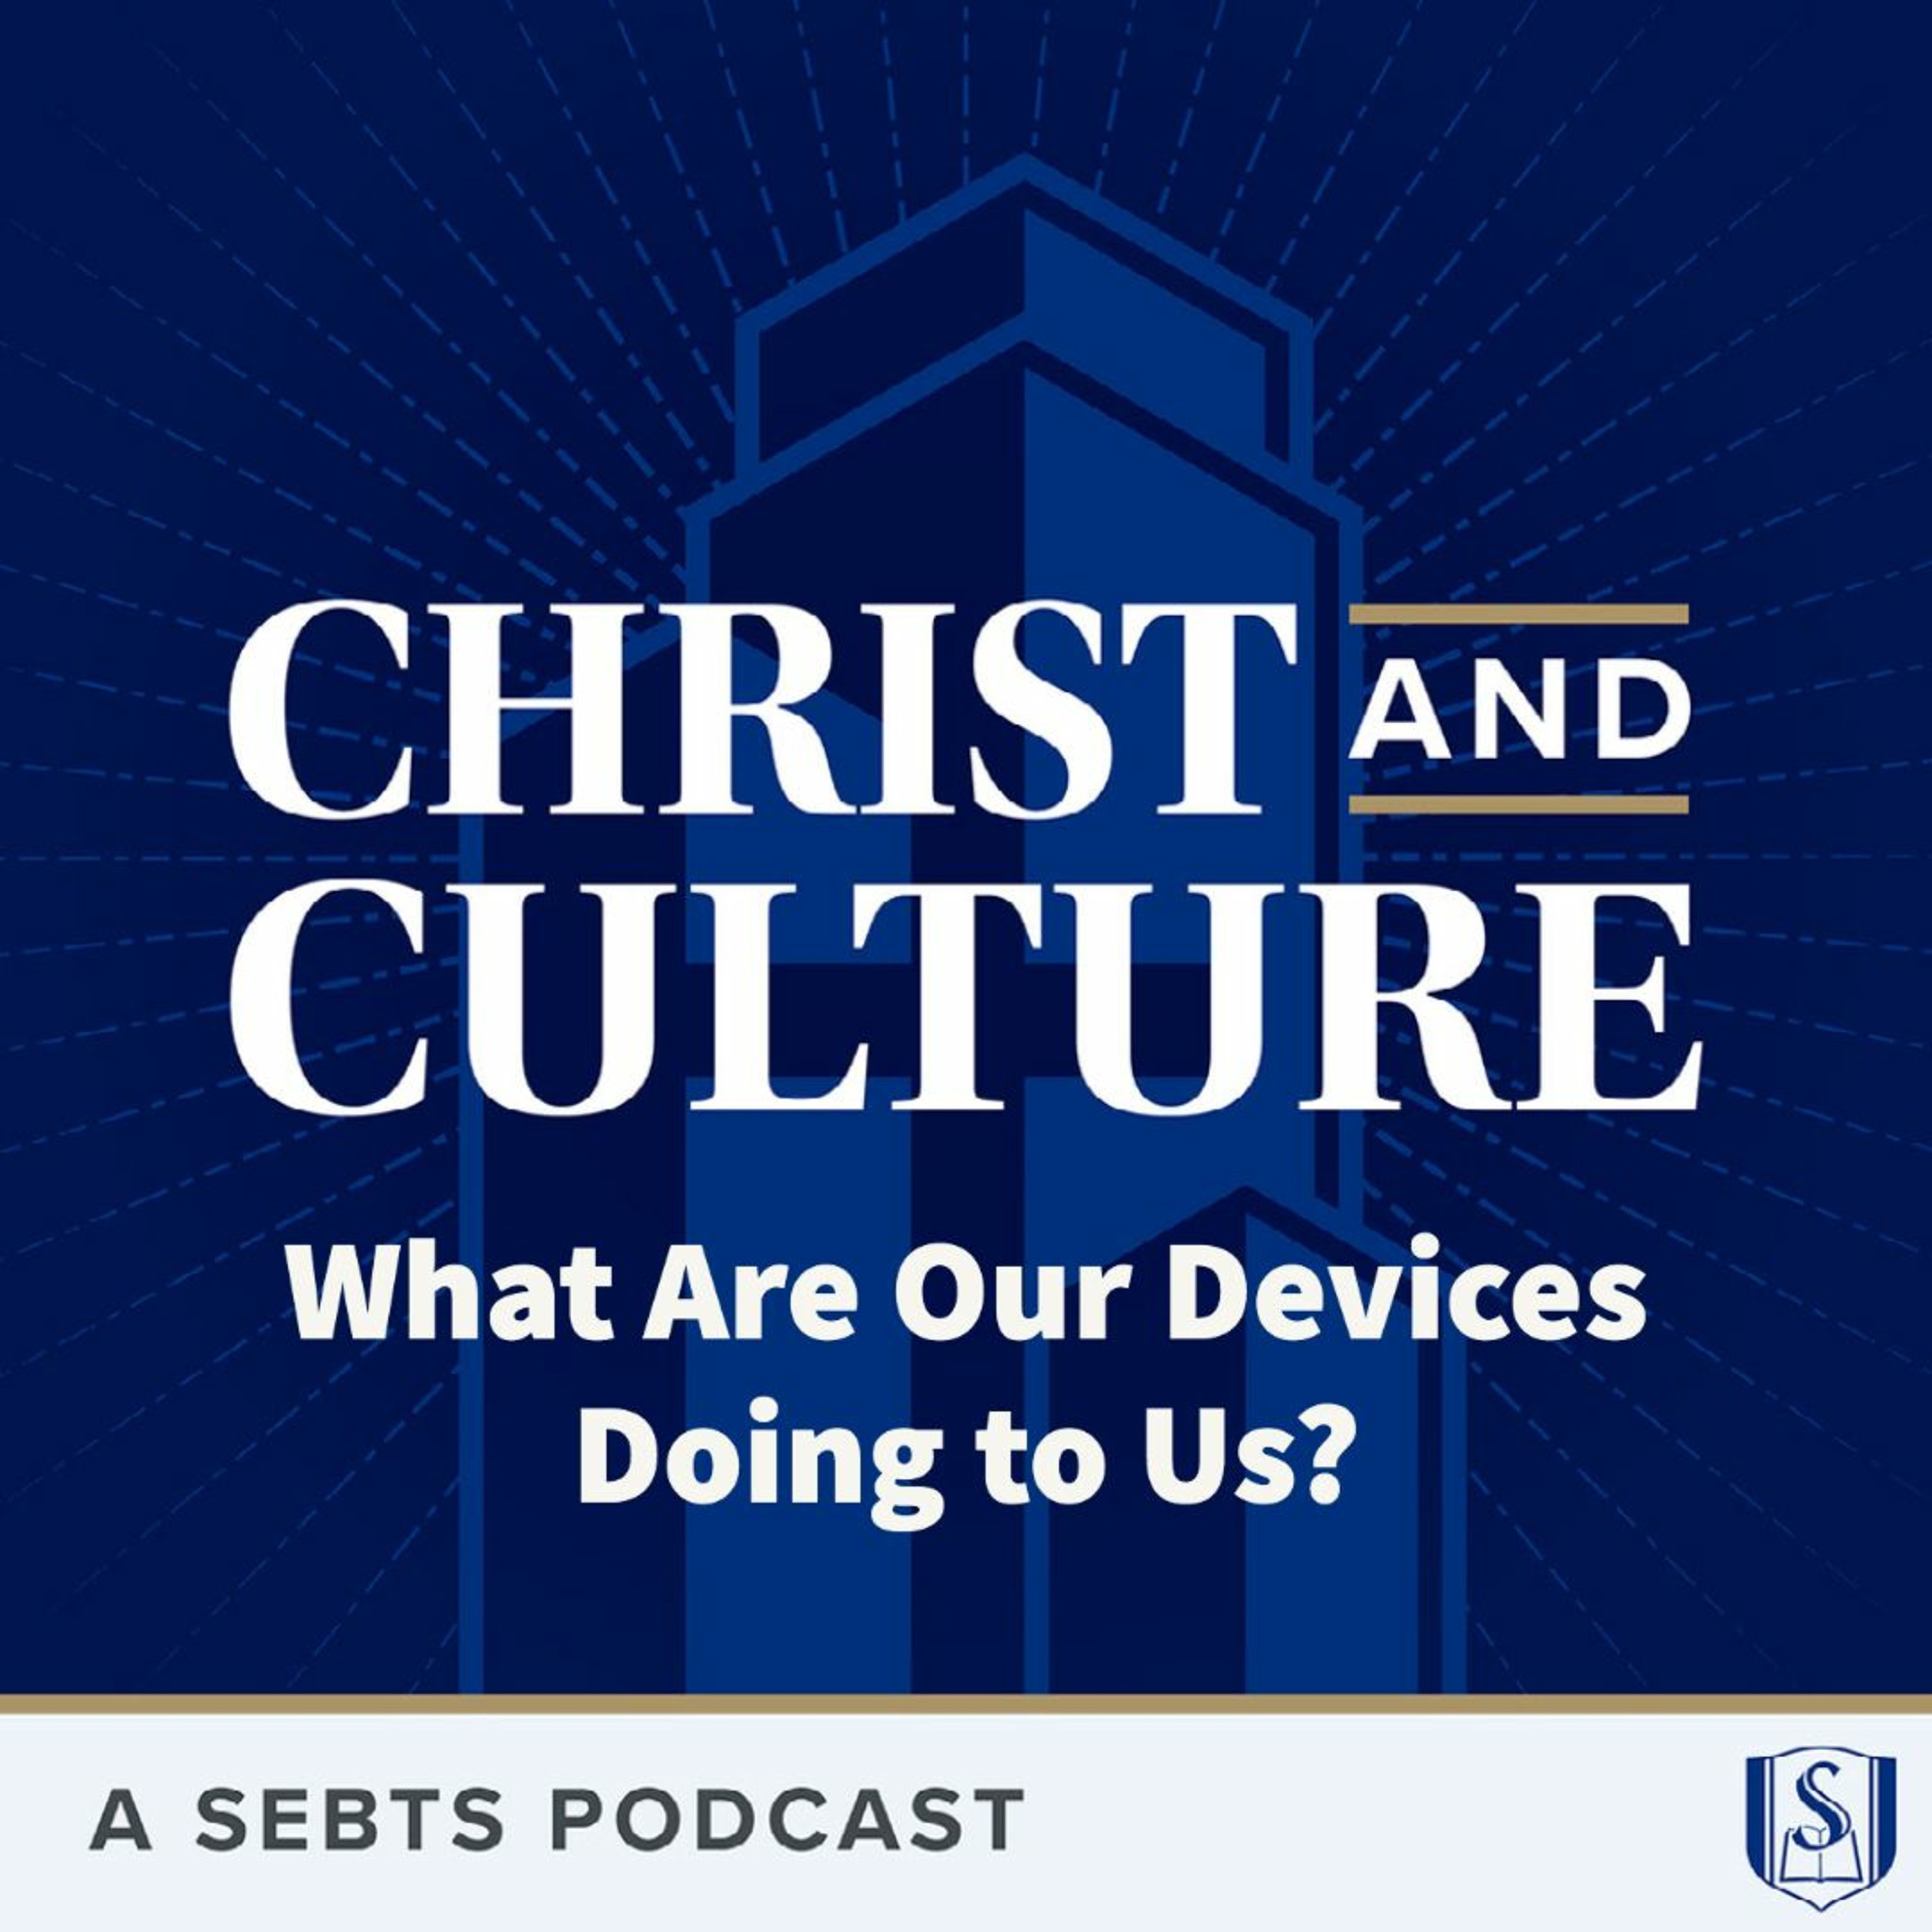 Felicia Wu Song: What Are Our Devices Doing to Us? - EP 62